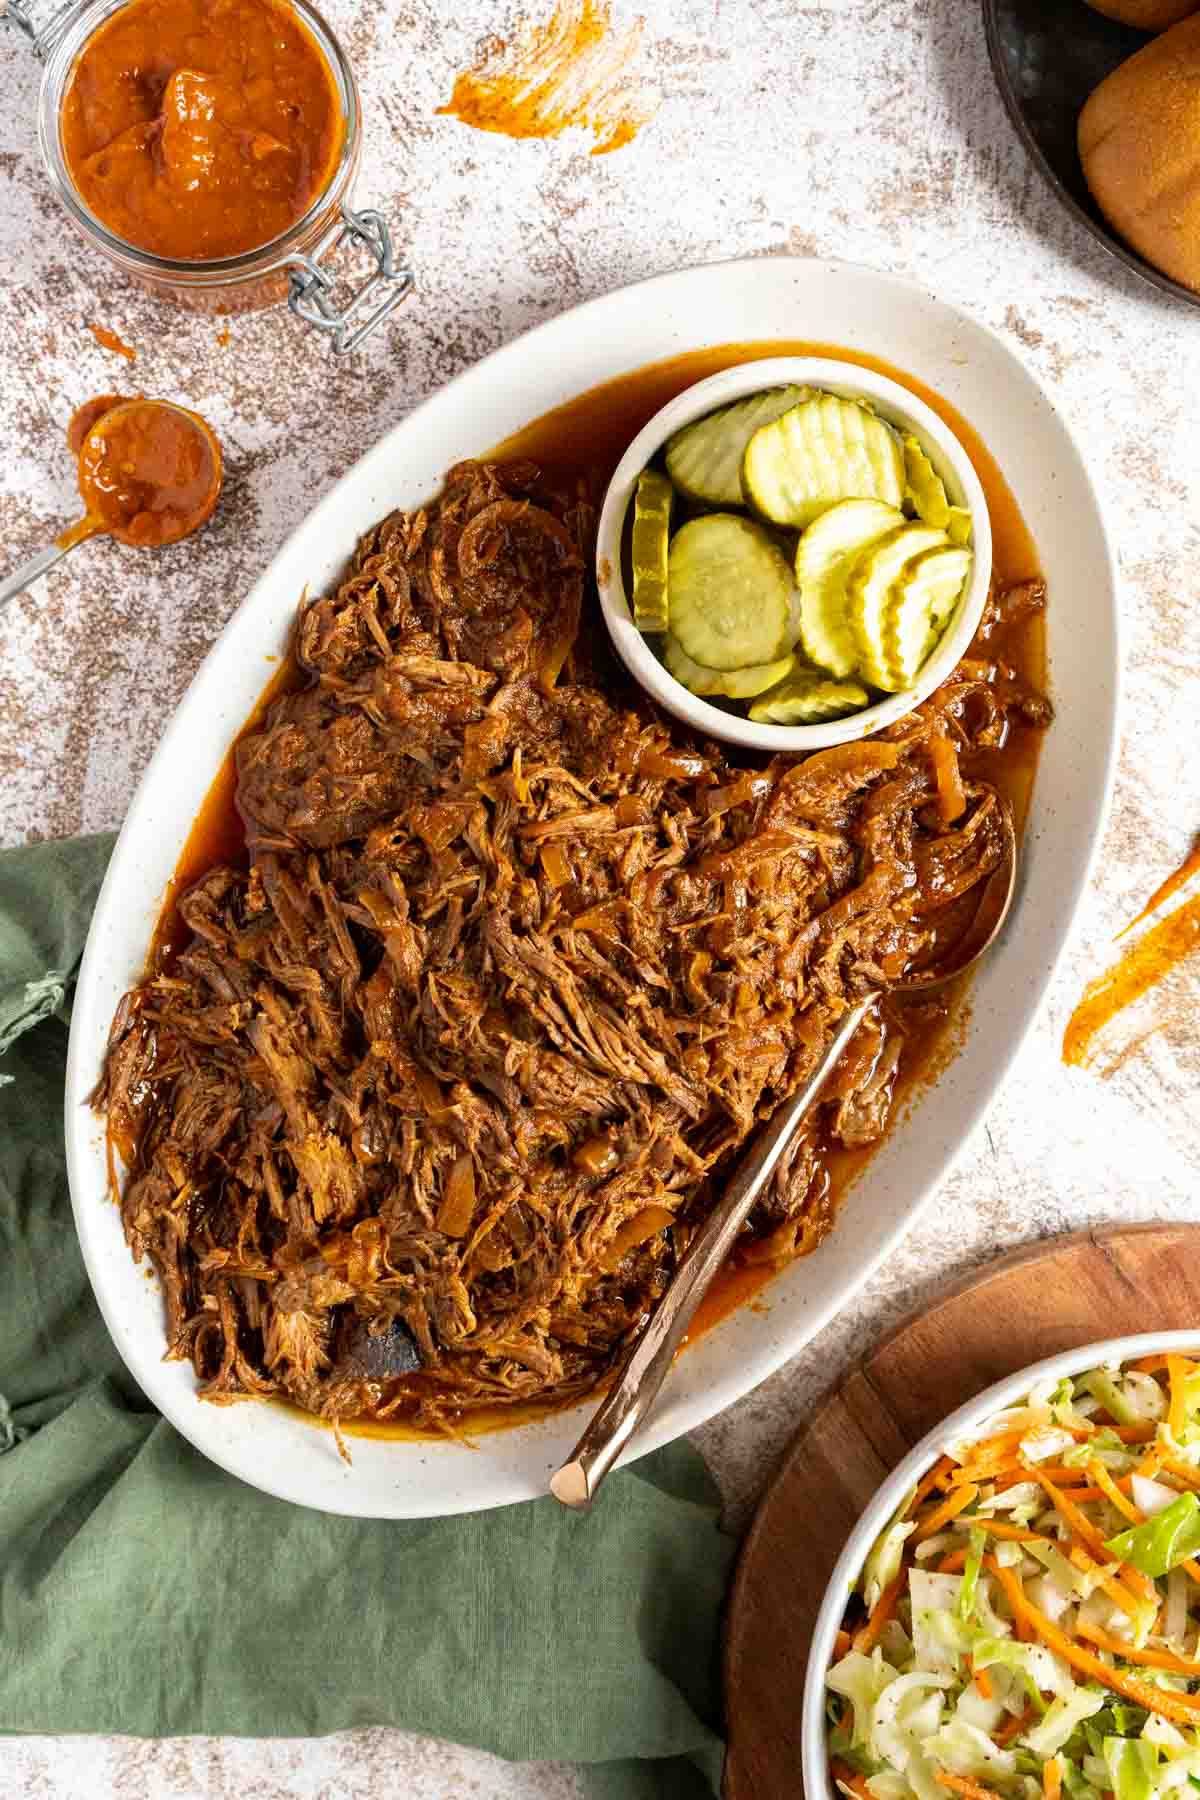 BBQ shredded beef on a serving platter with pickles and a side of coleslaw.